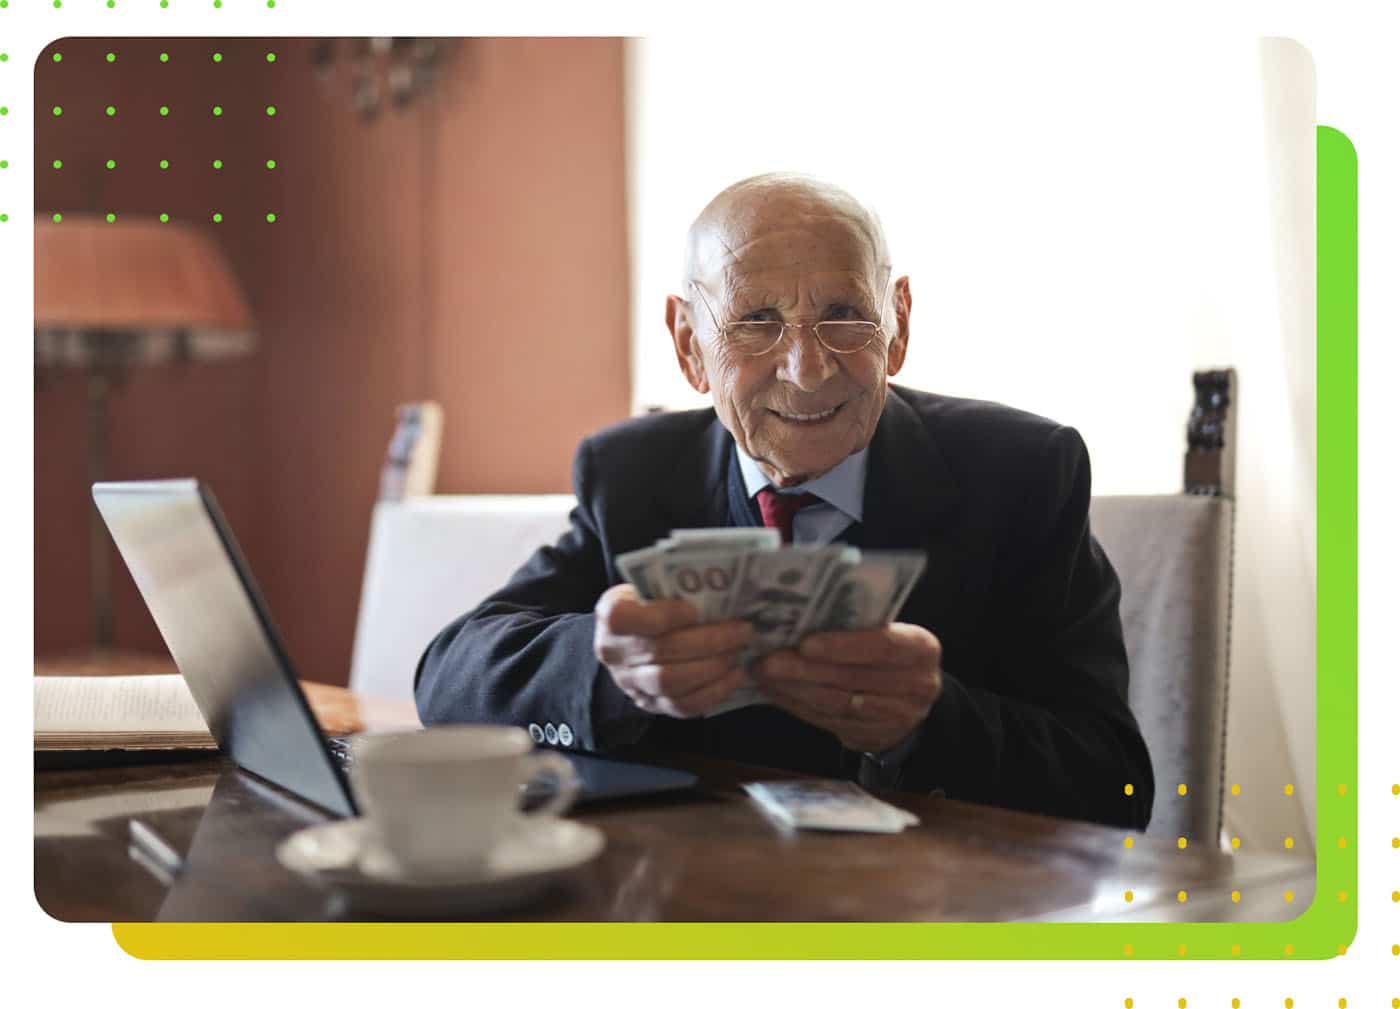 An old person wearing suit counting money in front of a laptop